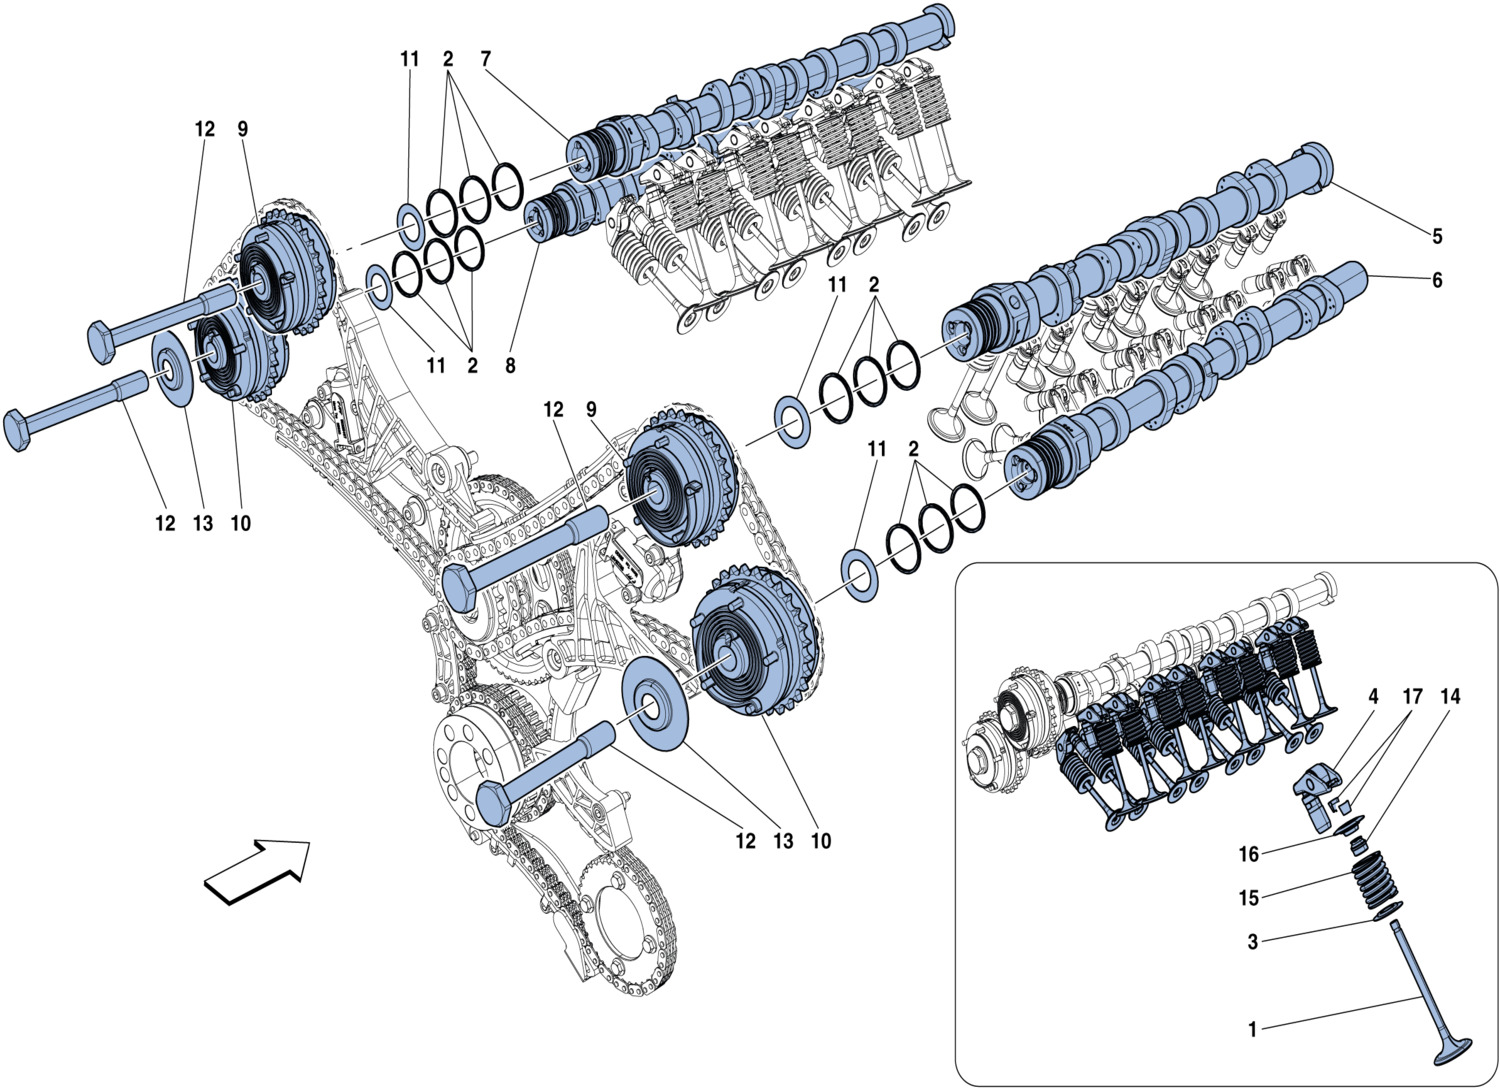 Schematic: Timing System - Camshafts And Valves